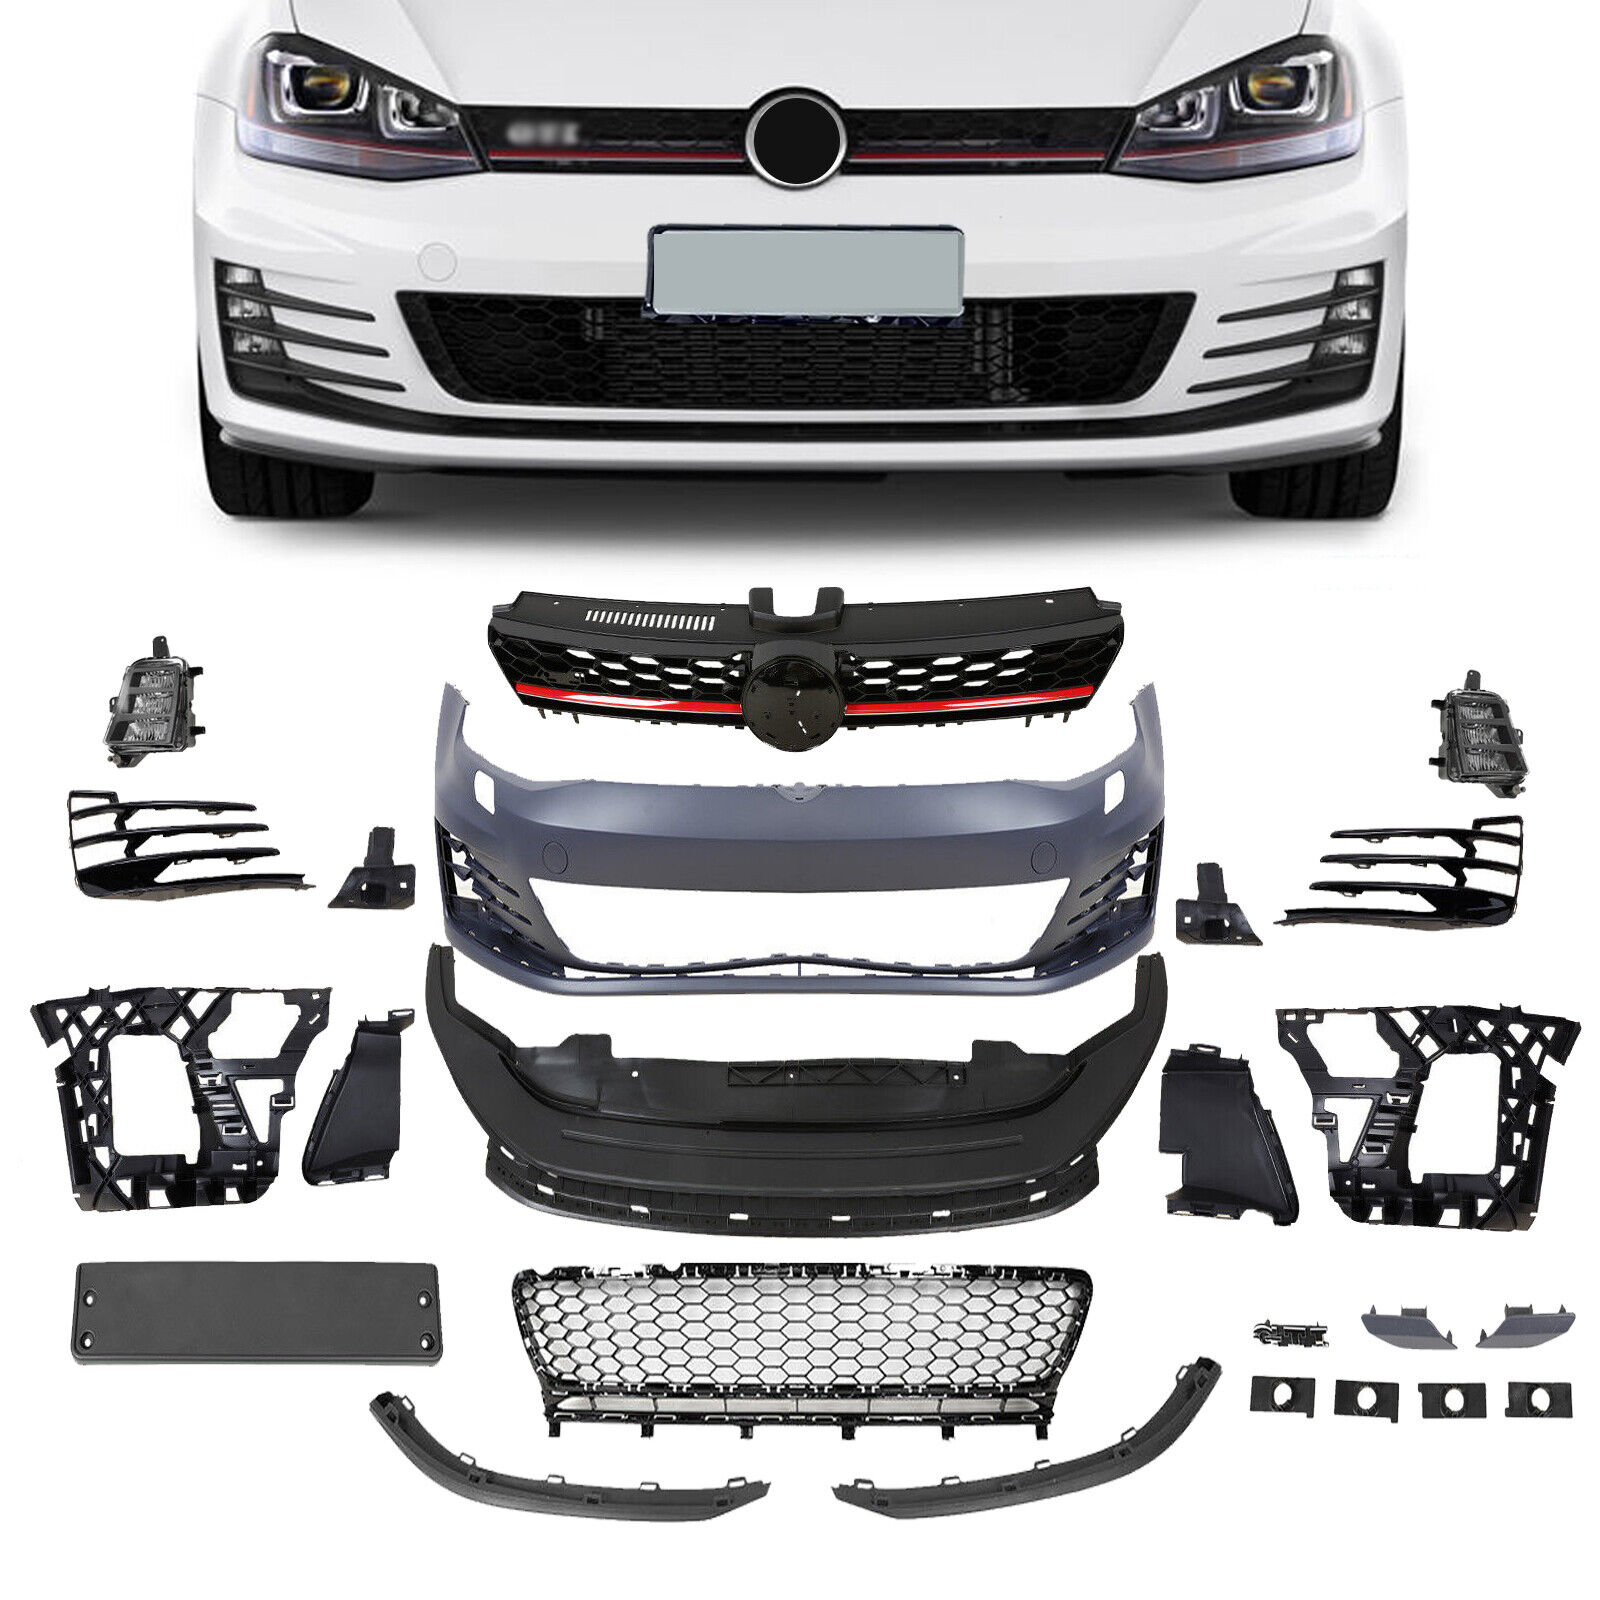 For 2015-2017 Volkswagen VW Golf MK7 Front Bumper Cover Kit GTI Style Unpainted